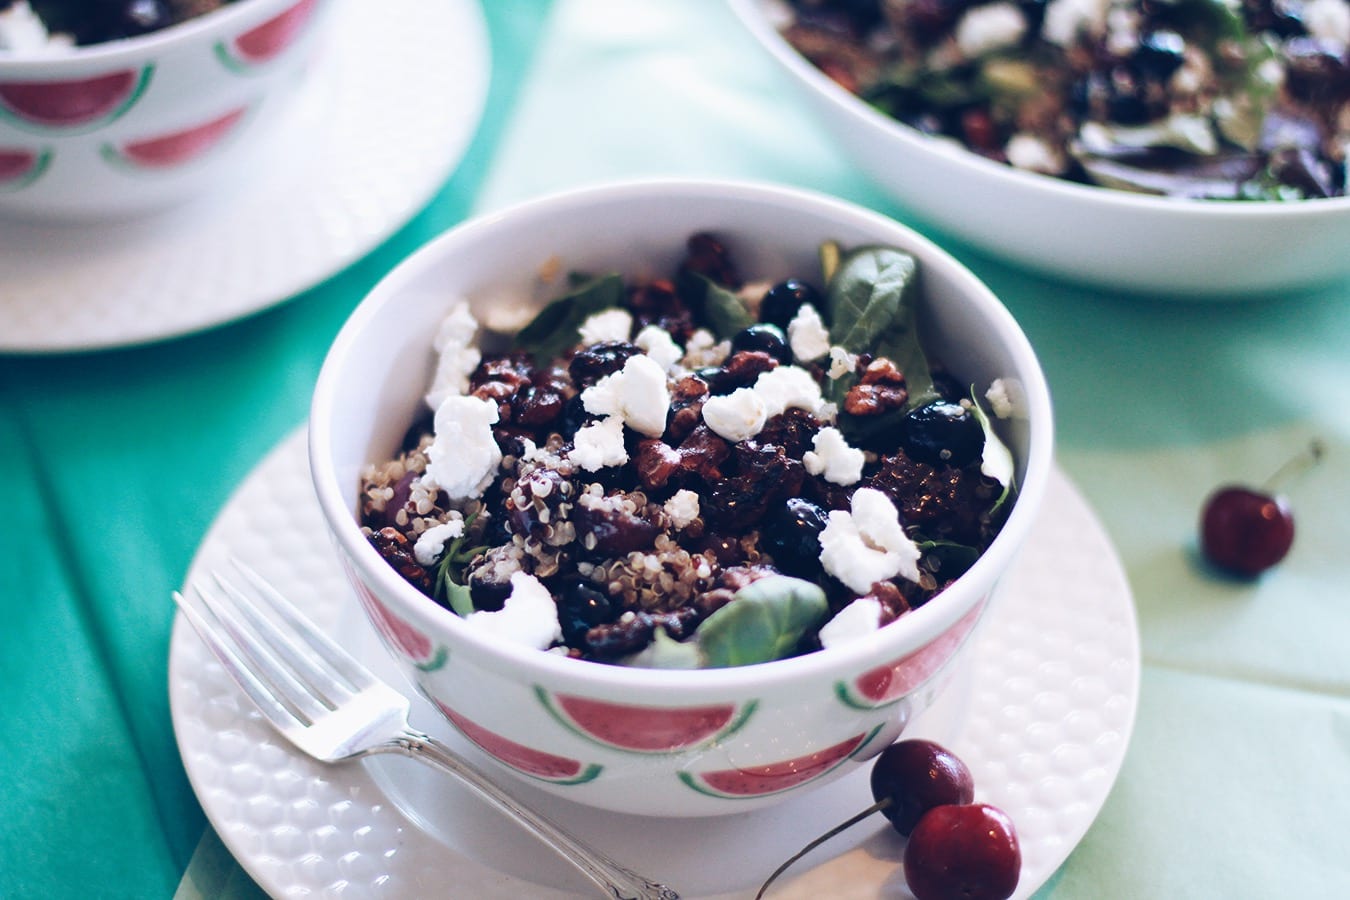 Quinoa Salad with Balsamic Roasted Cherries, Blueberries and Candied Walnuts